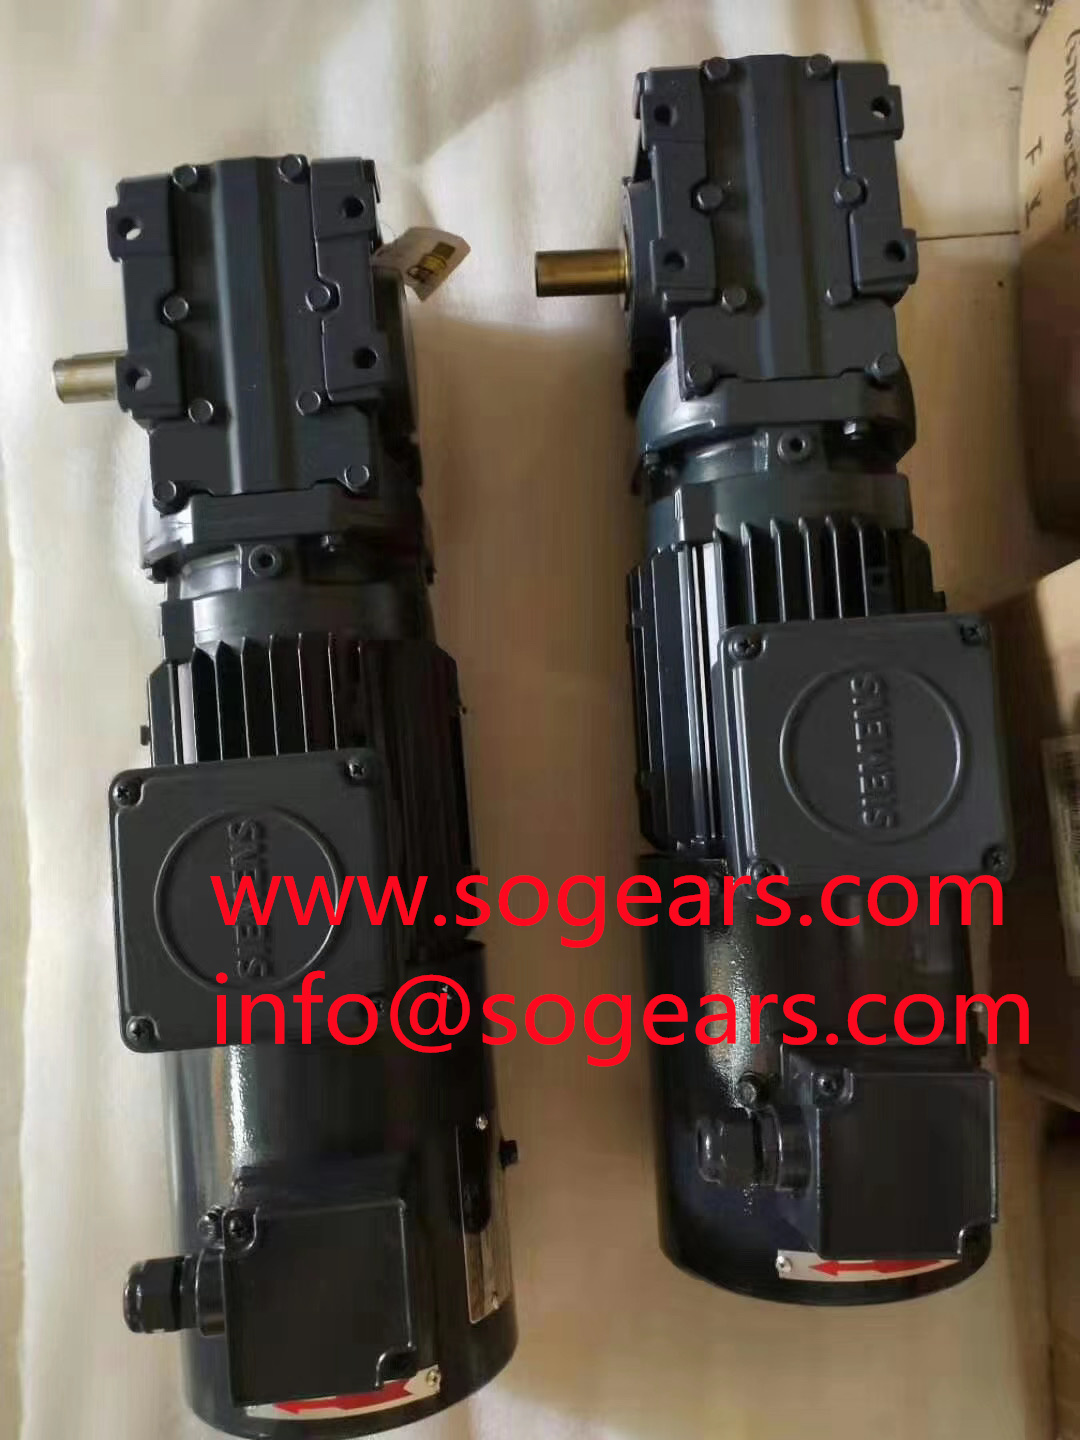 K47 series helical gearbox with 71B5 input